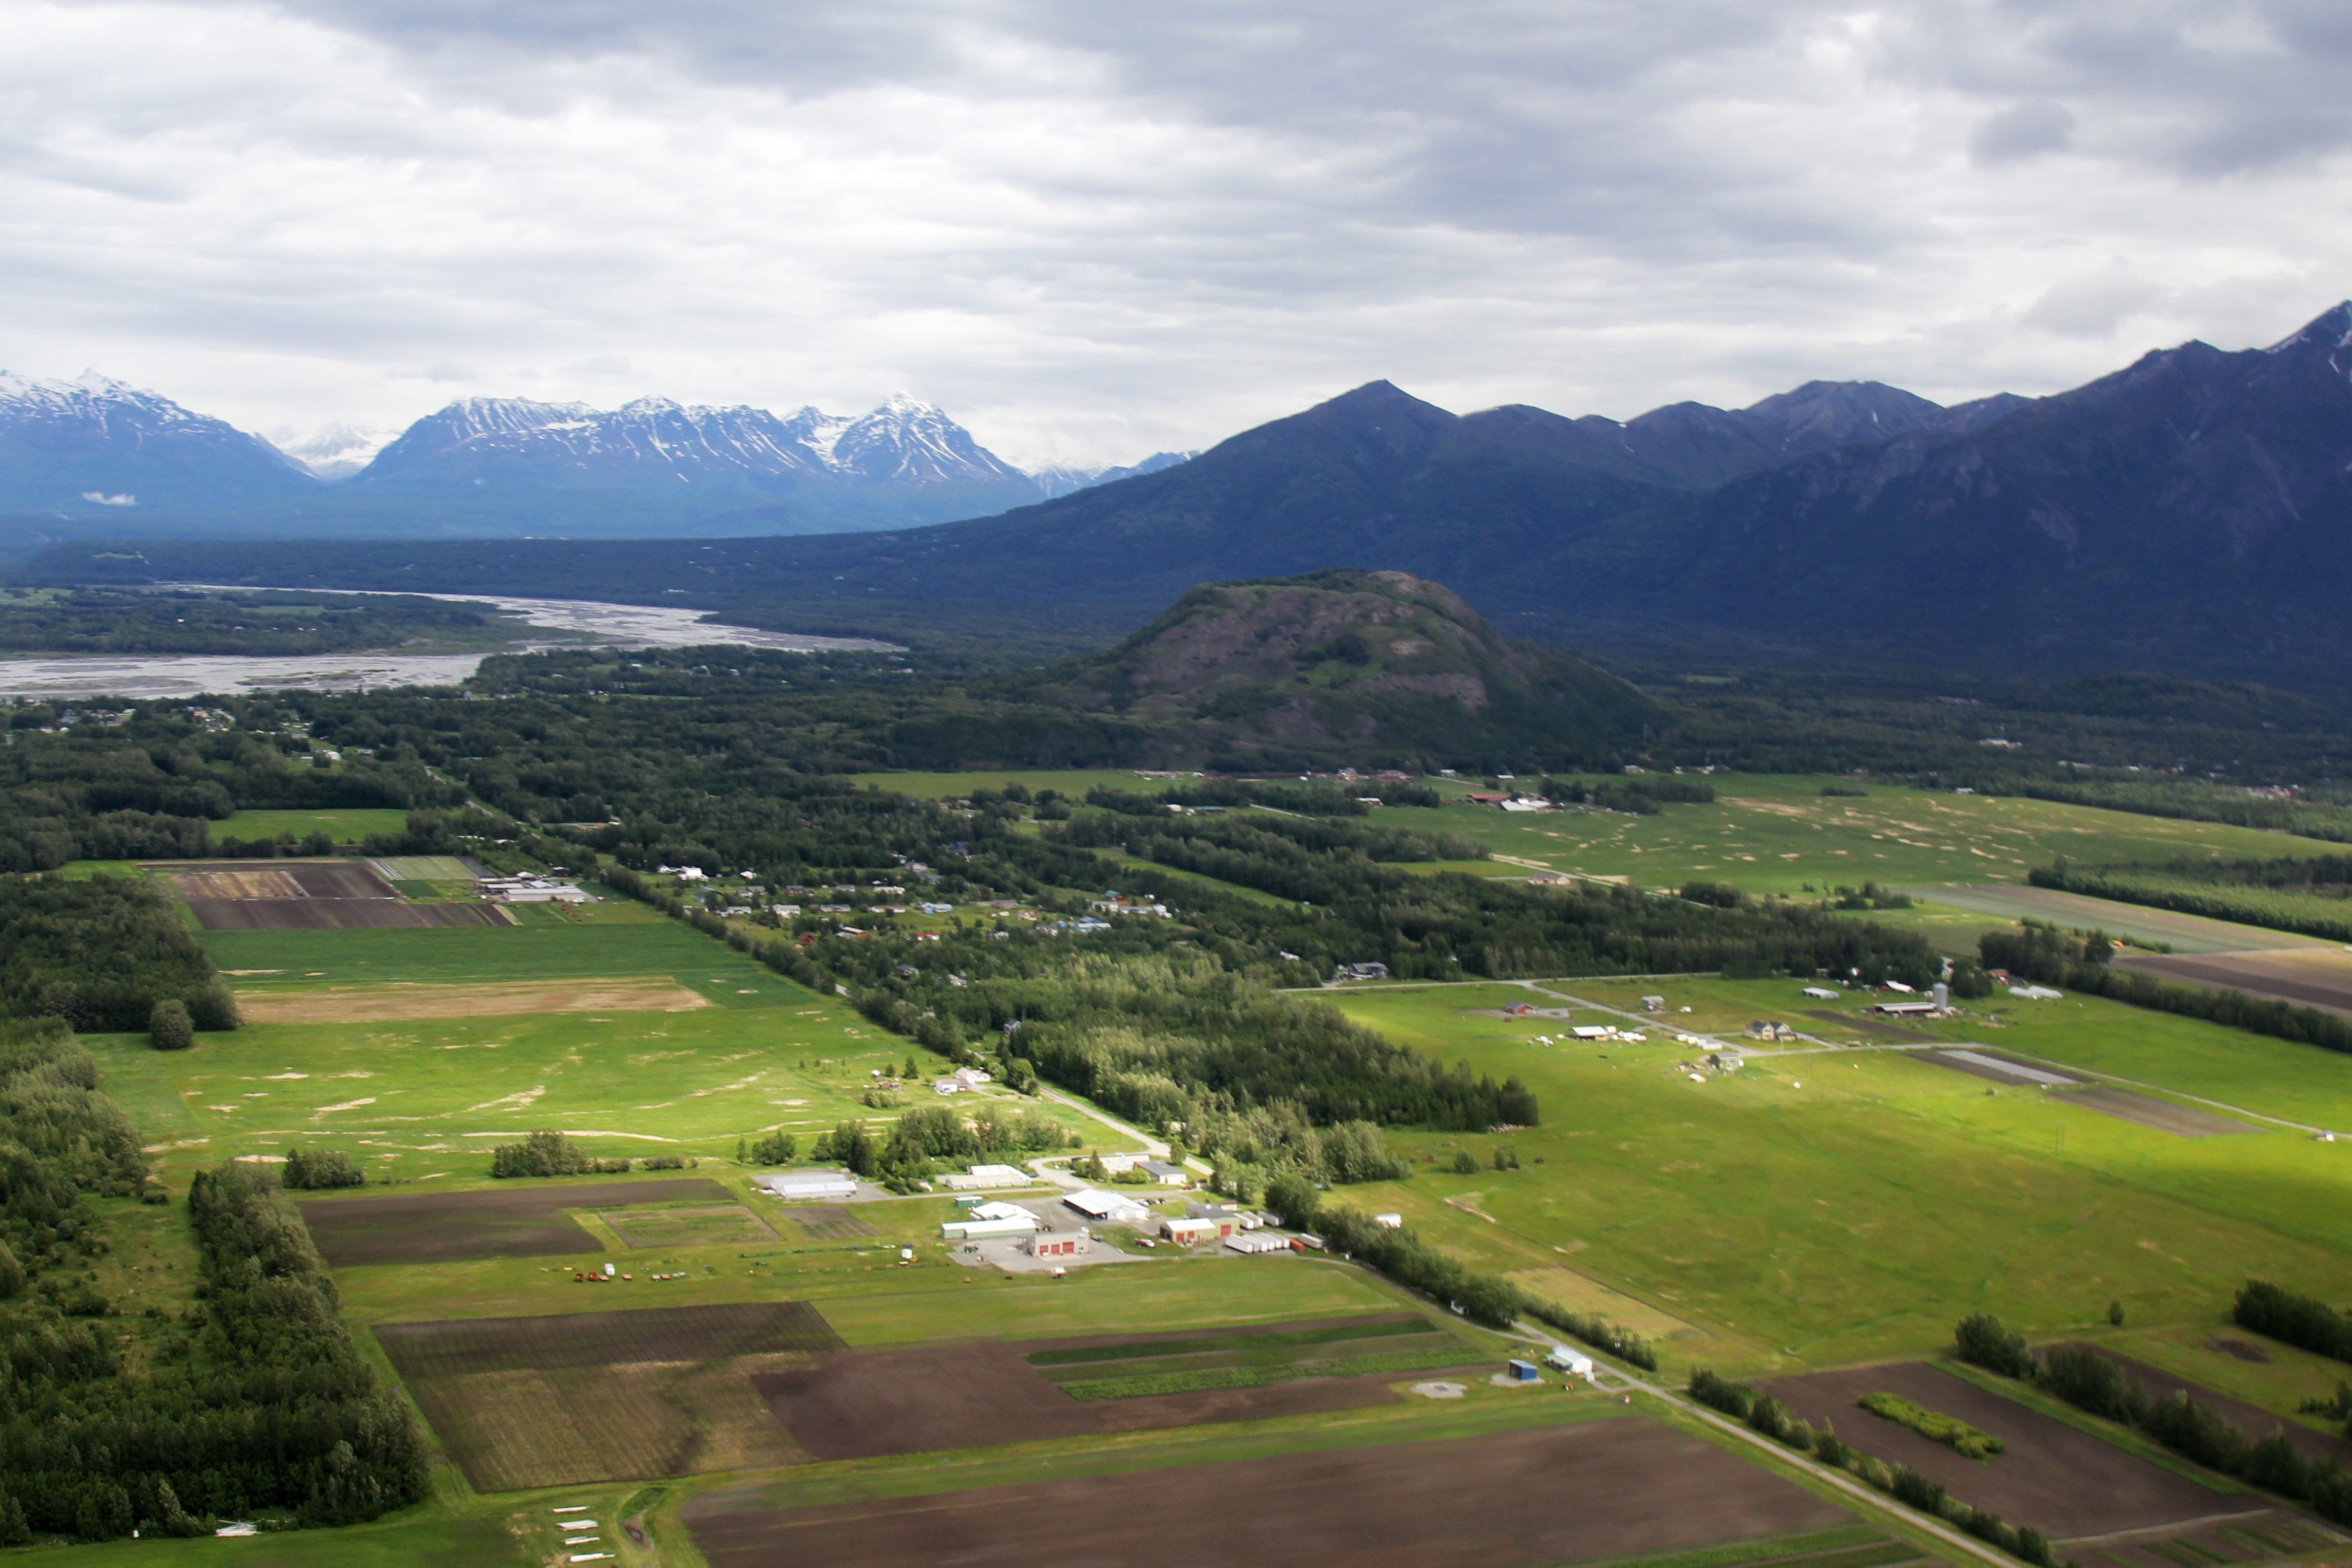 An aerial view of green farmland with a mountainous backdrop.